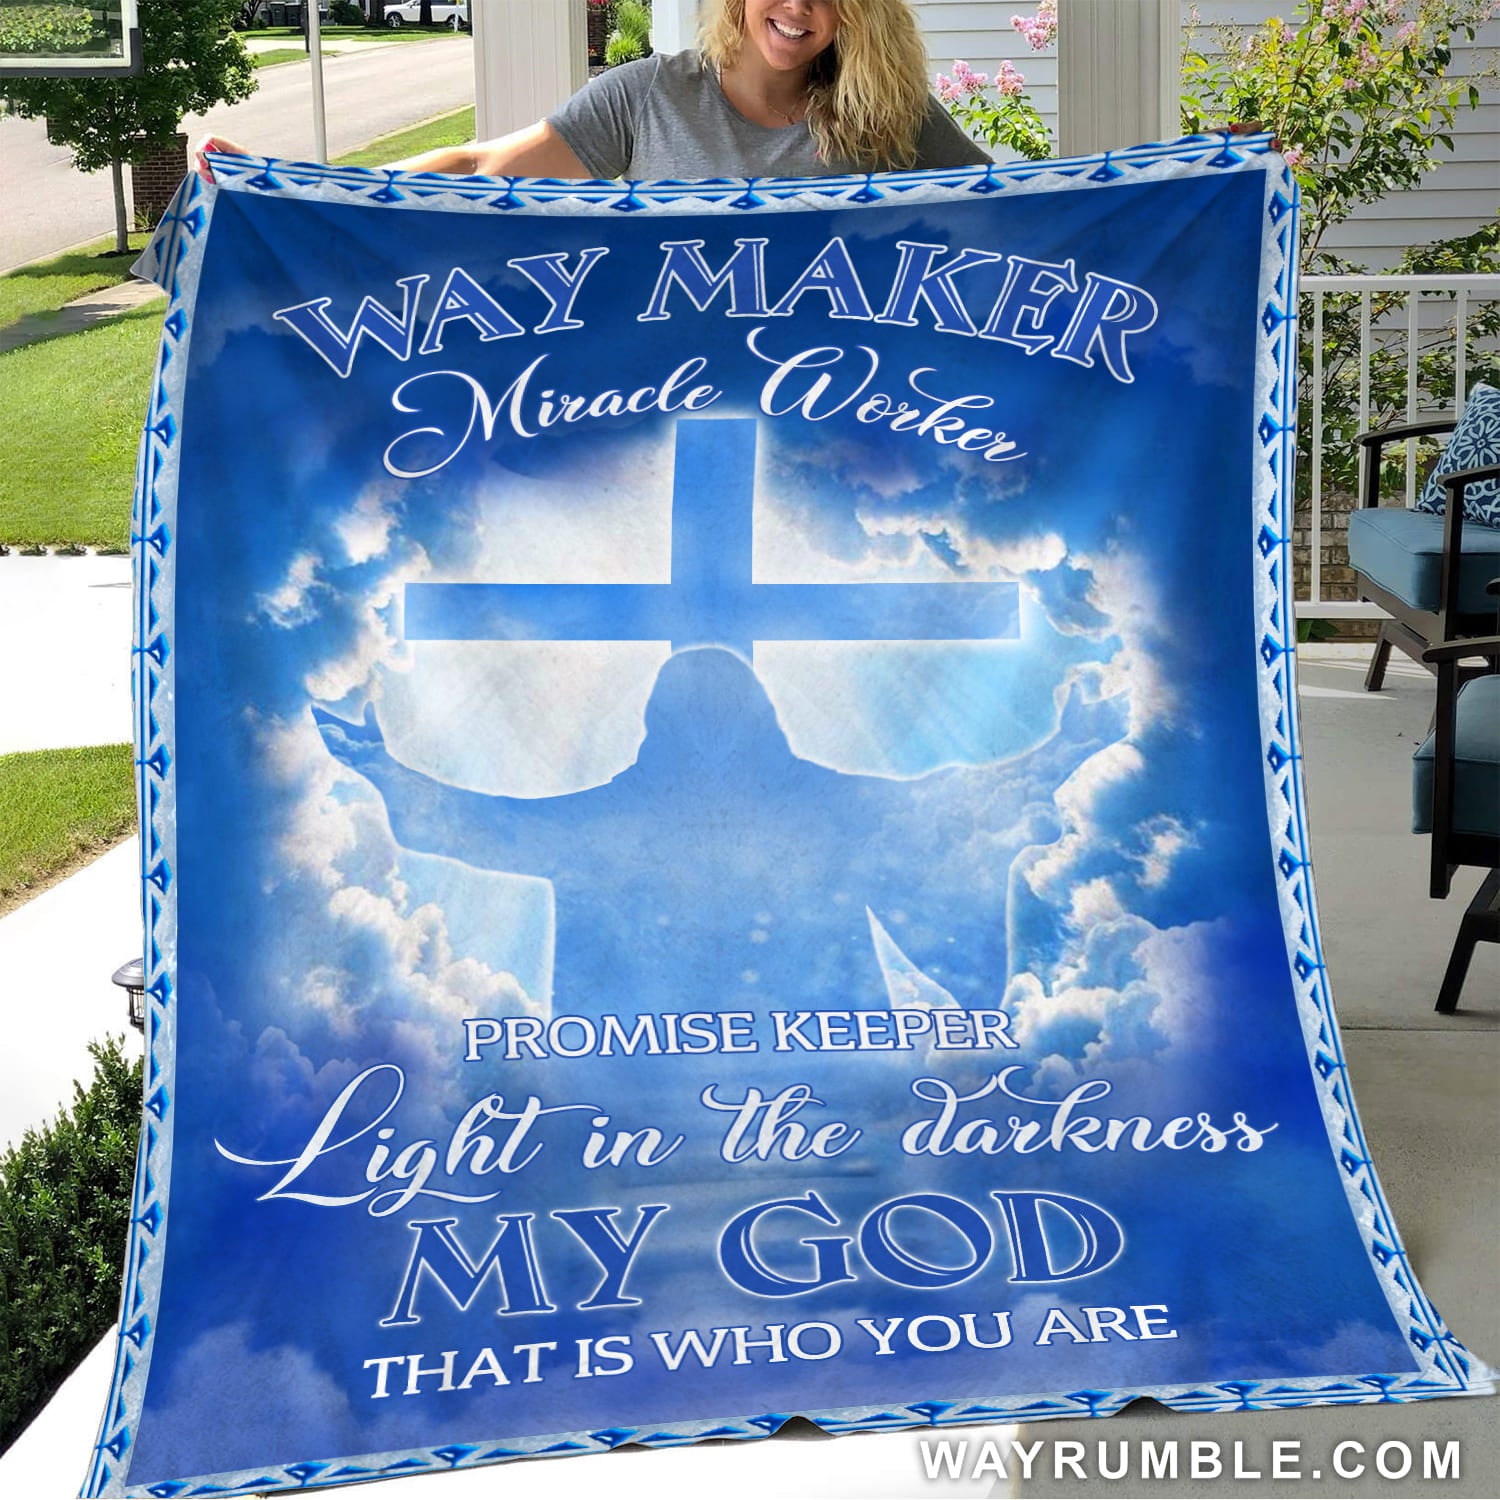 Jesus With Open Arms On The Sky – Way Maker, Miracle Worker – Blanket